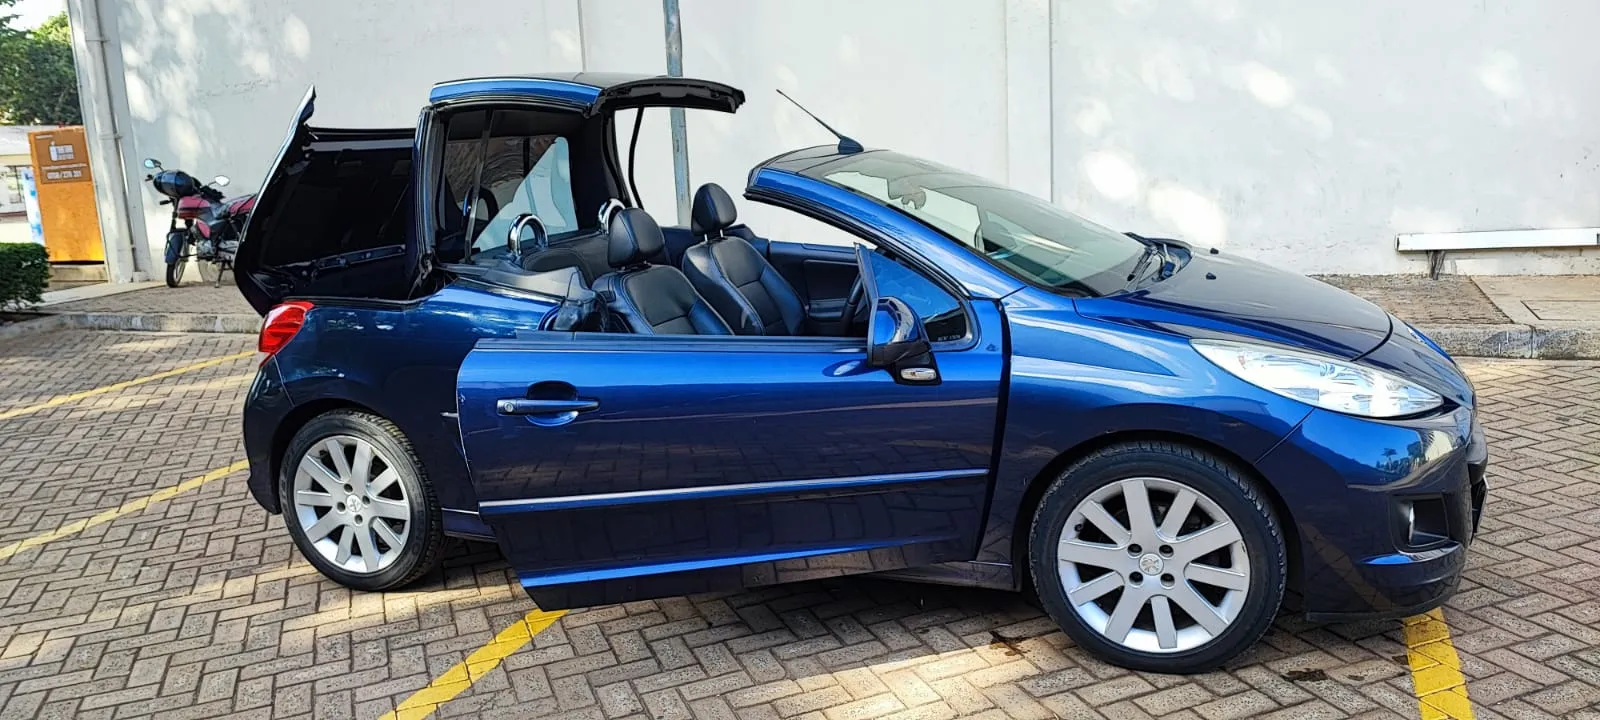 Peugeot 207 CONVERTIBLE You ONLY Pay 30% Deposit Trade in Ok QUICK SALE